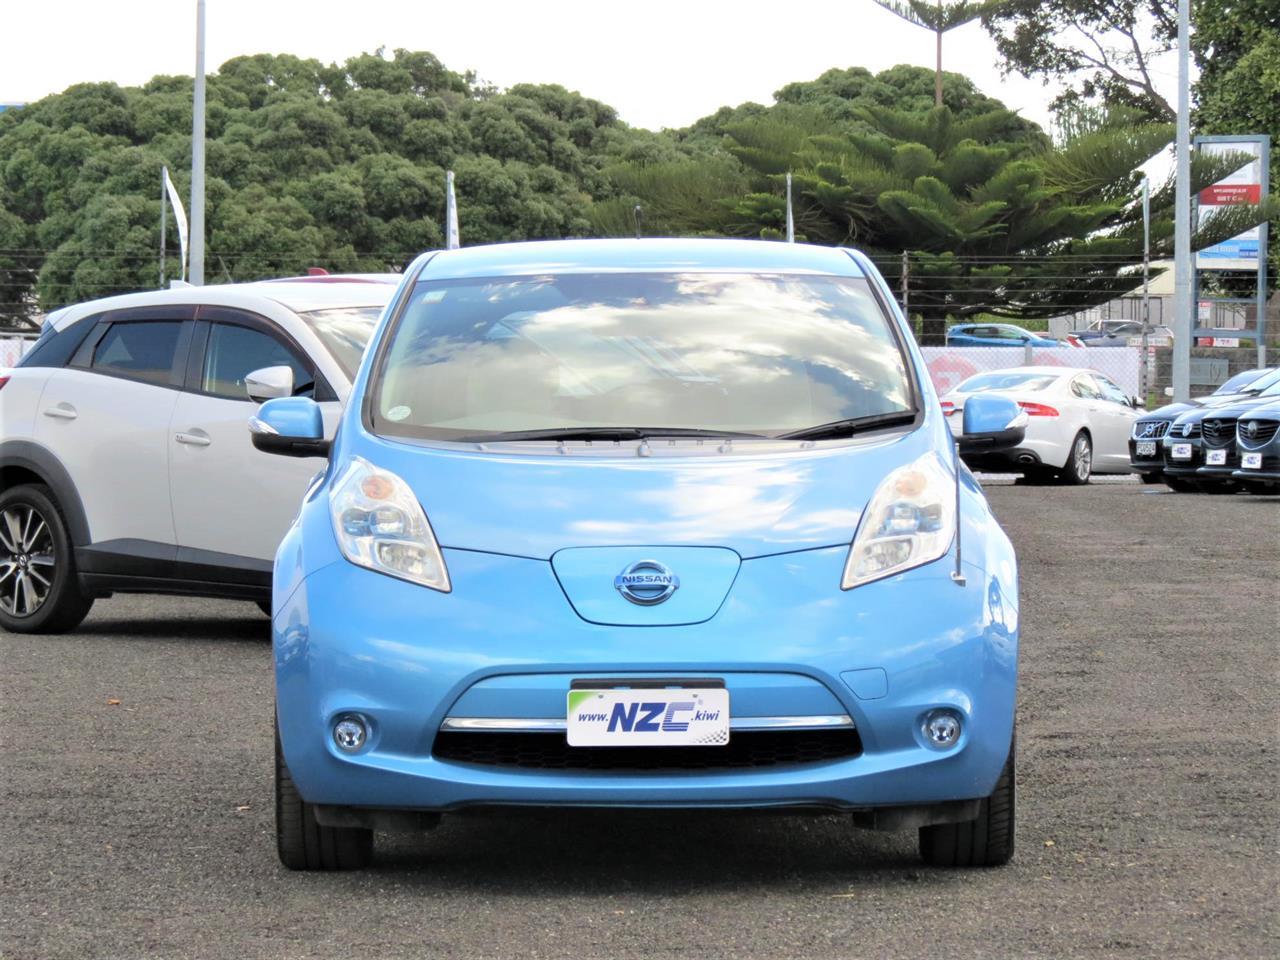 2012 Nissan Leaf only $42 weekly